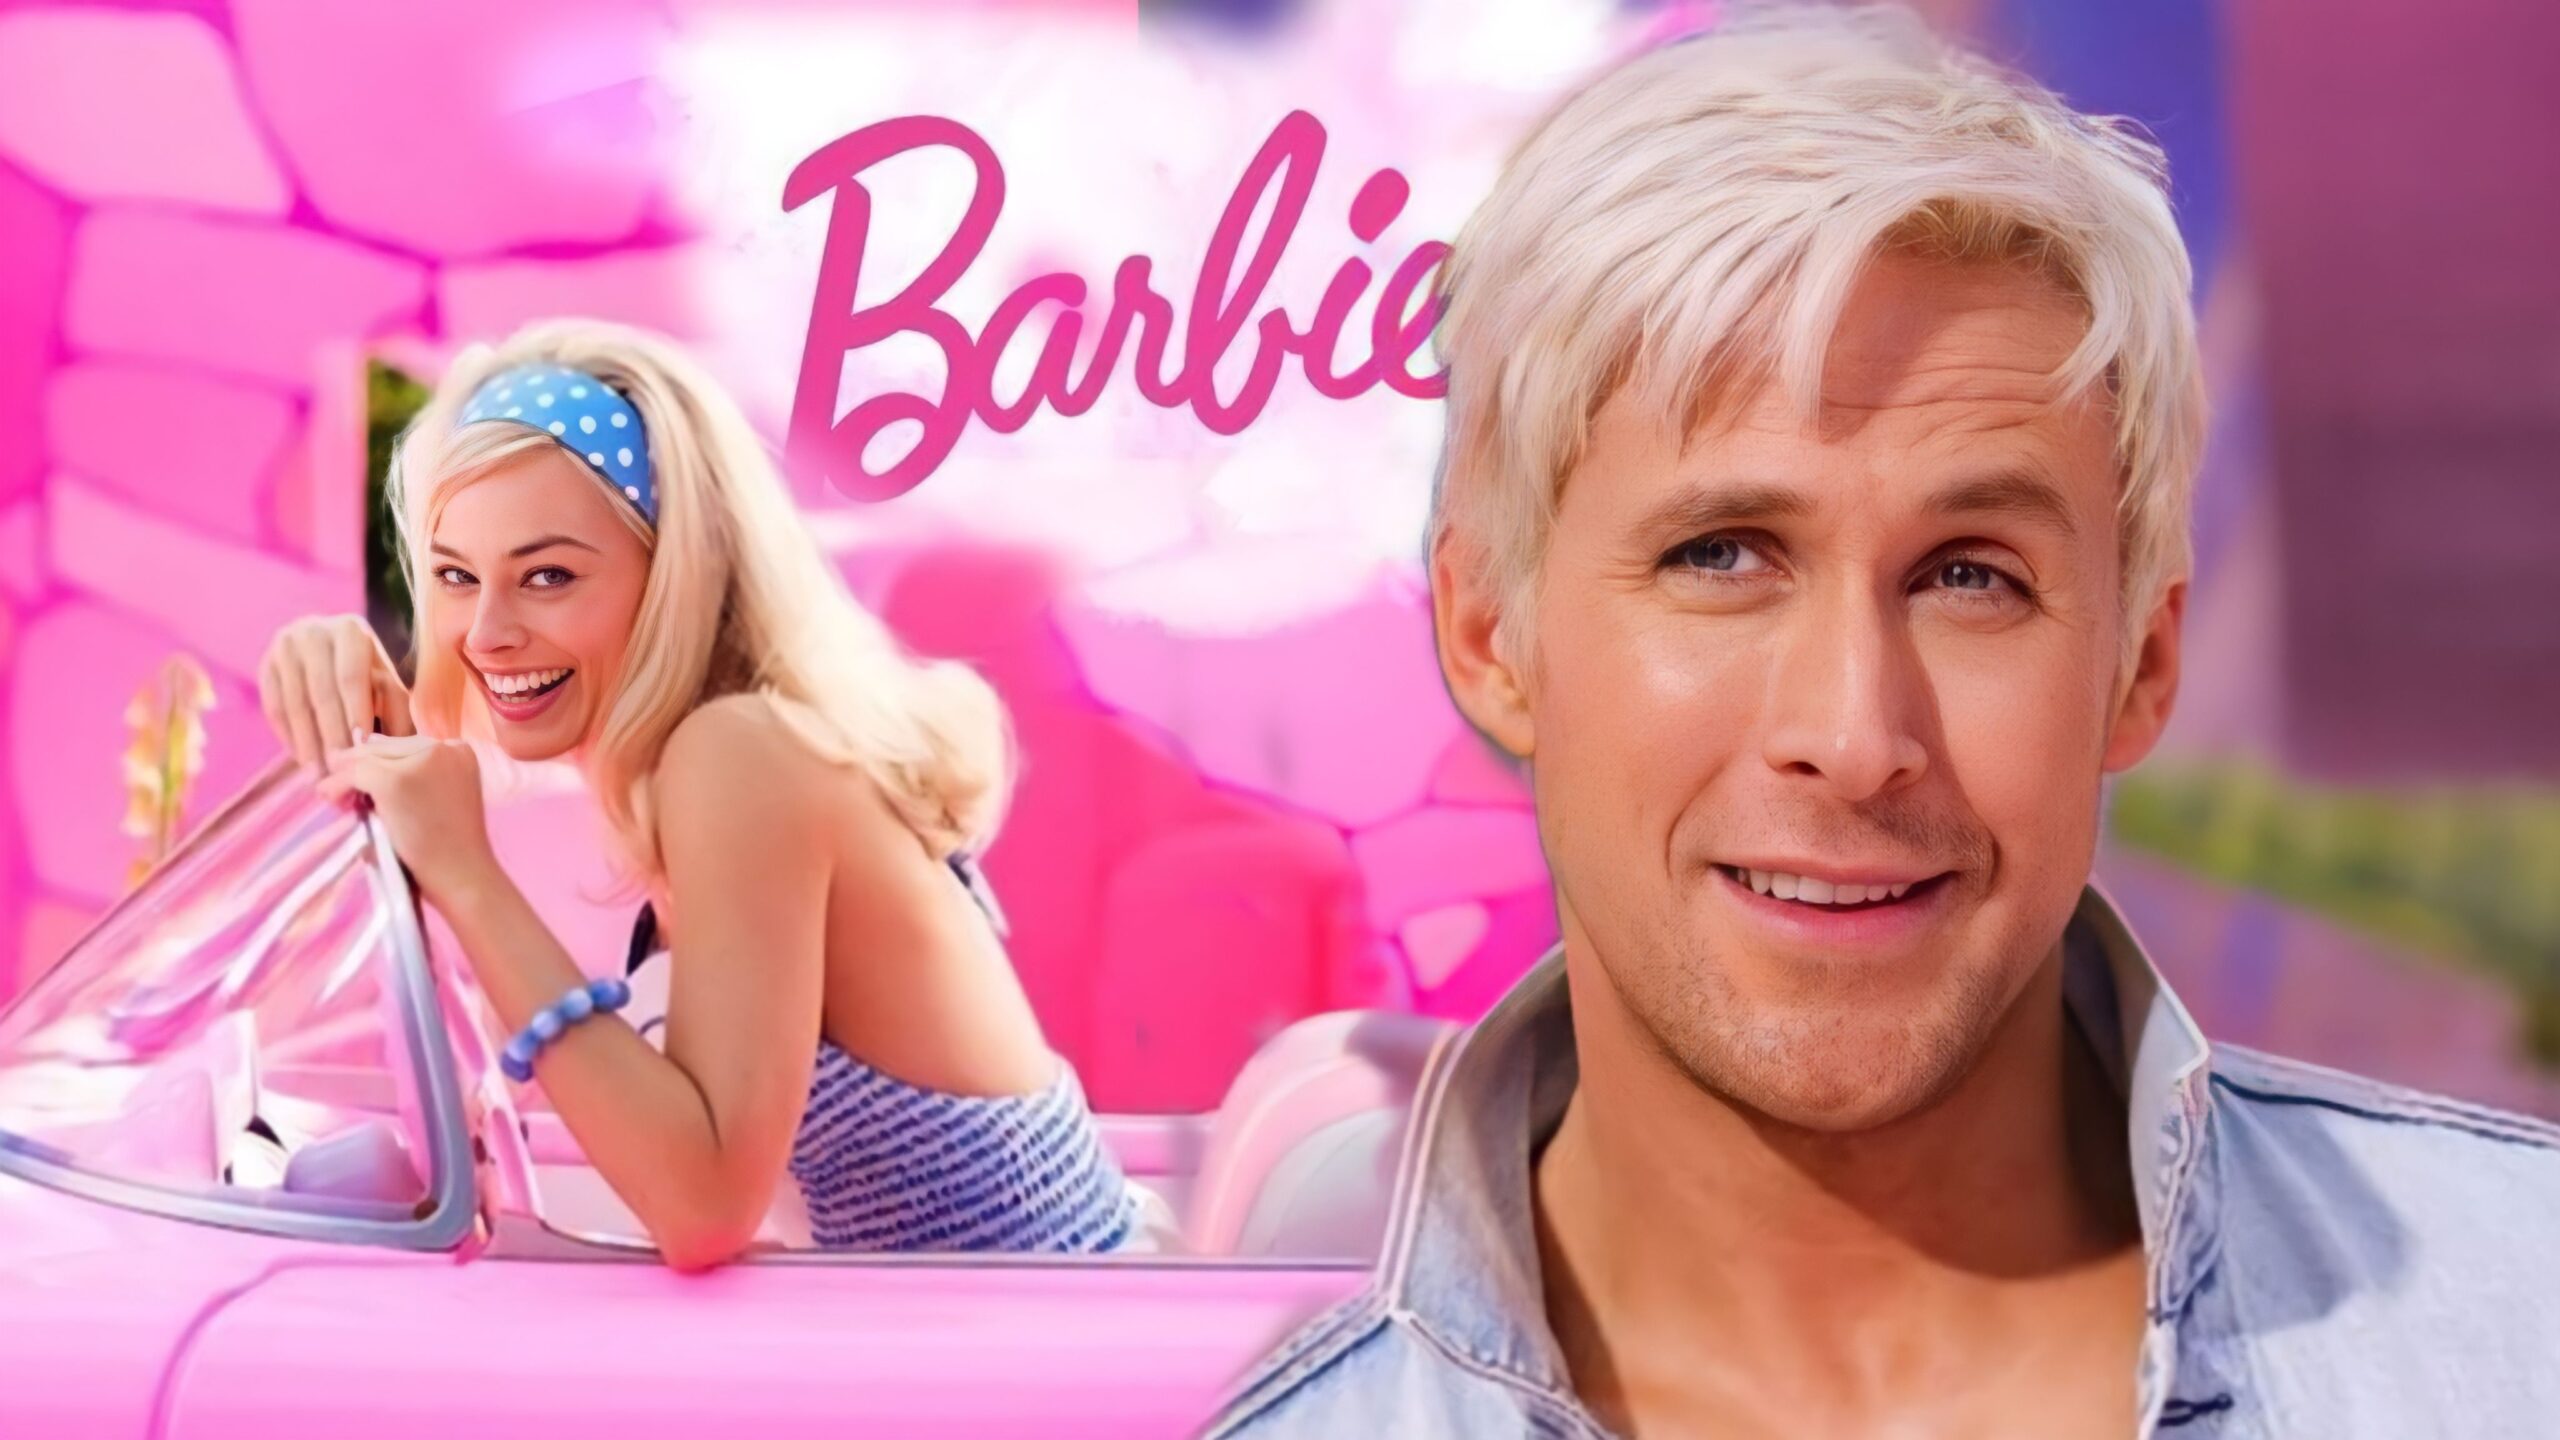 Ryan Gosling Reacts to Barbie Fans Criticizing His Ken Casting